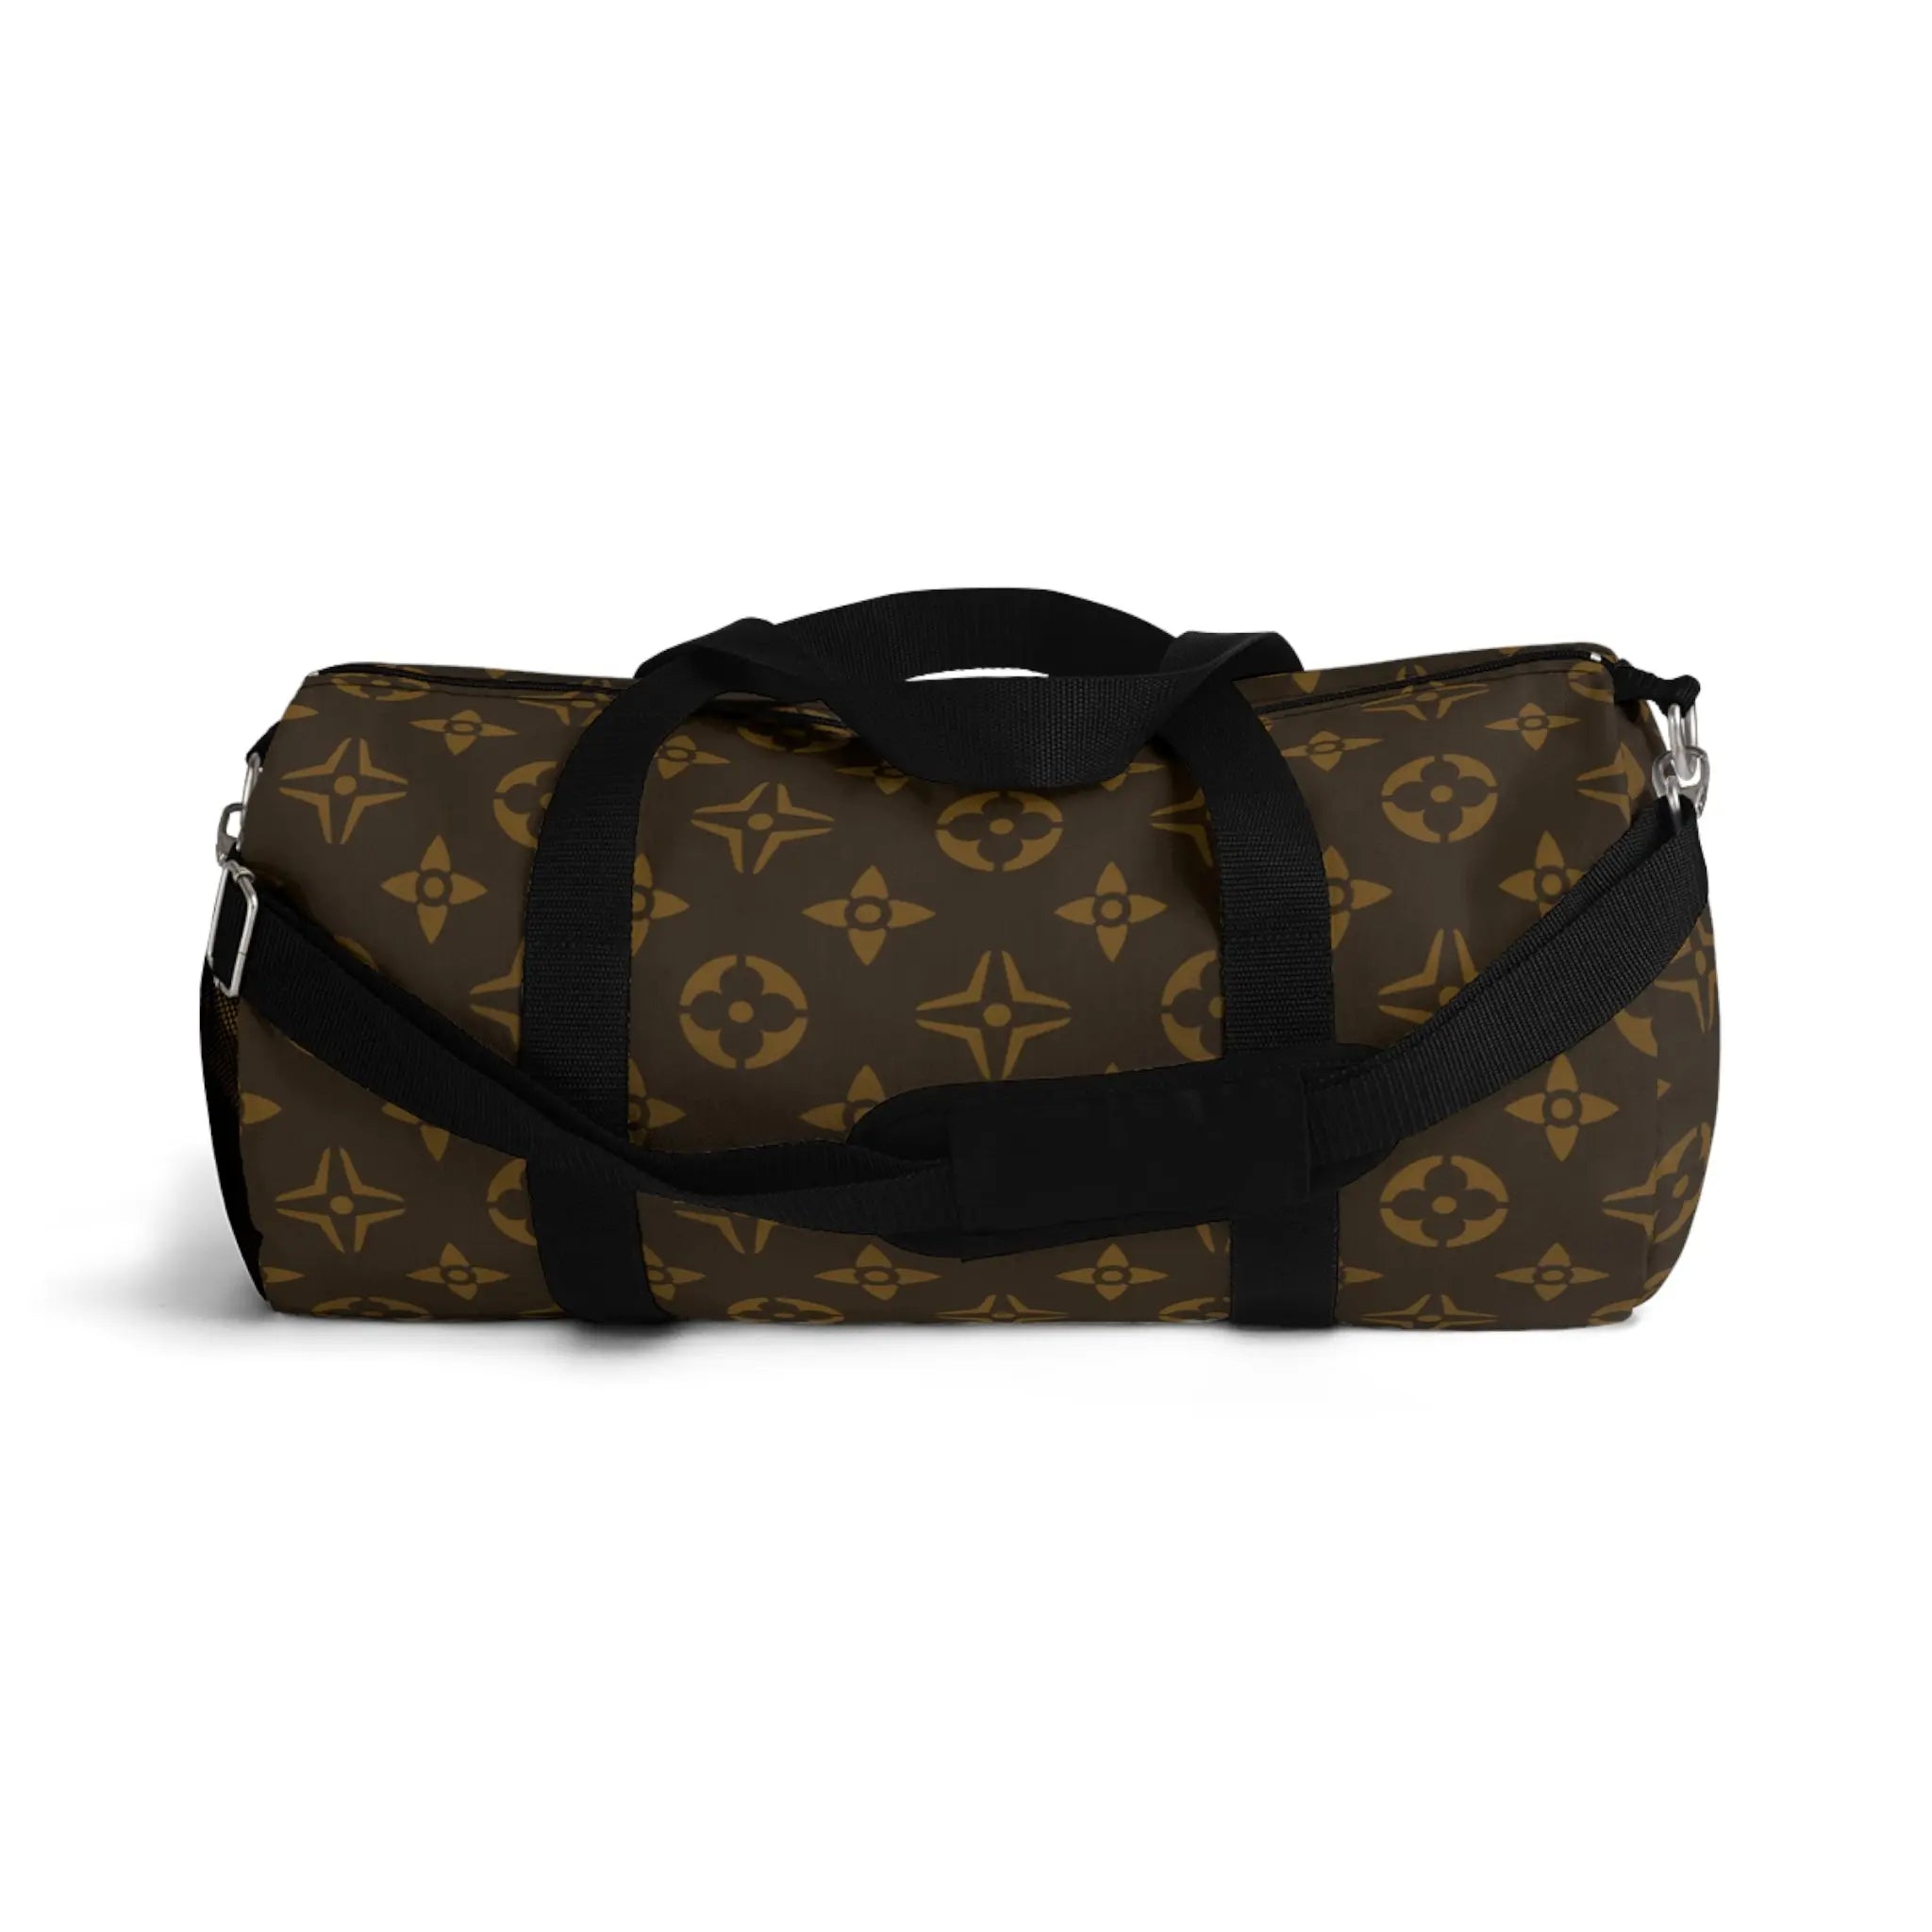  Abby Pattern Icons in Gold and Brown Duffel Bag, Travel and Overnight Bag Bags